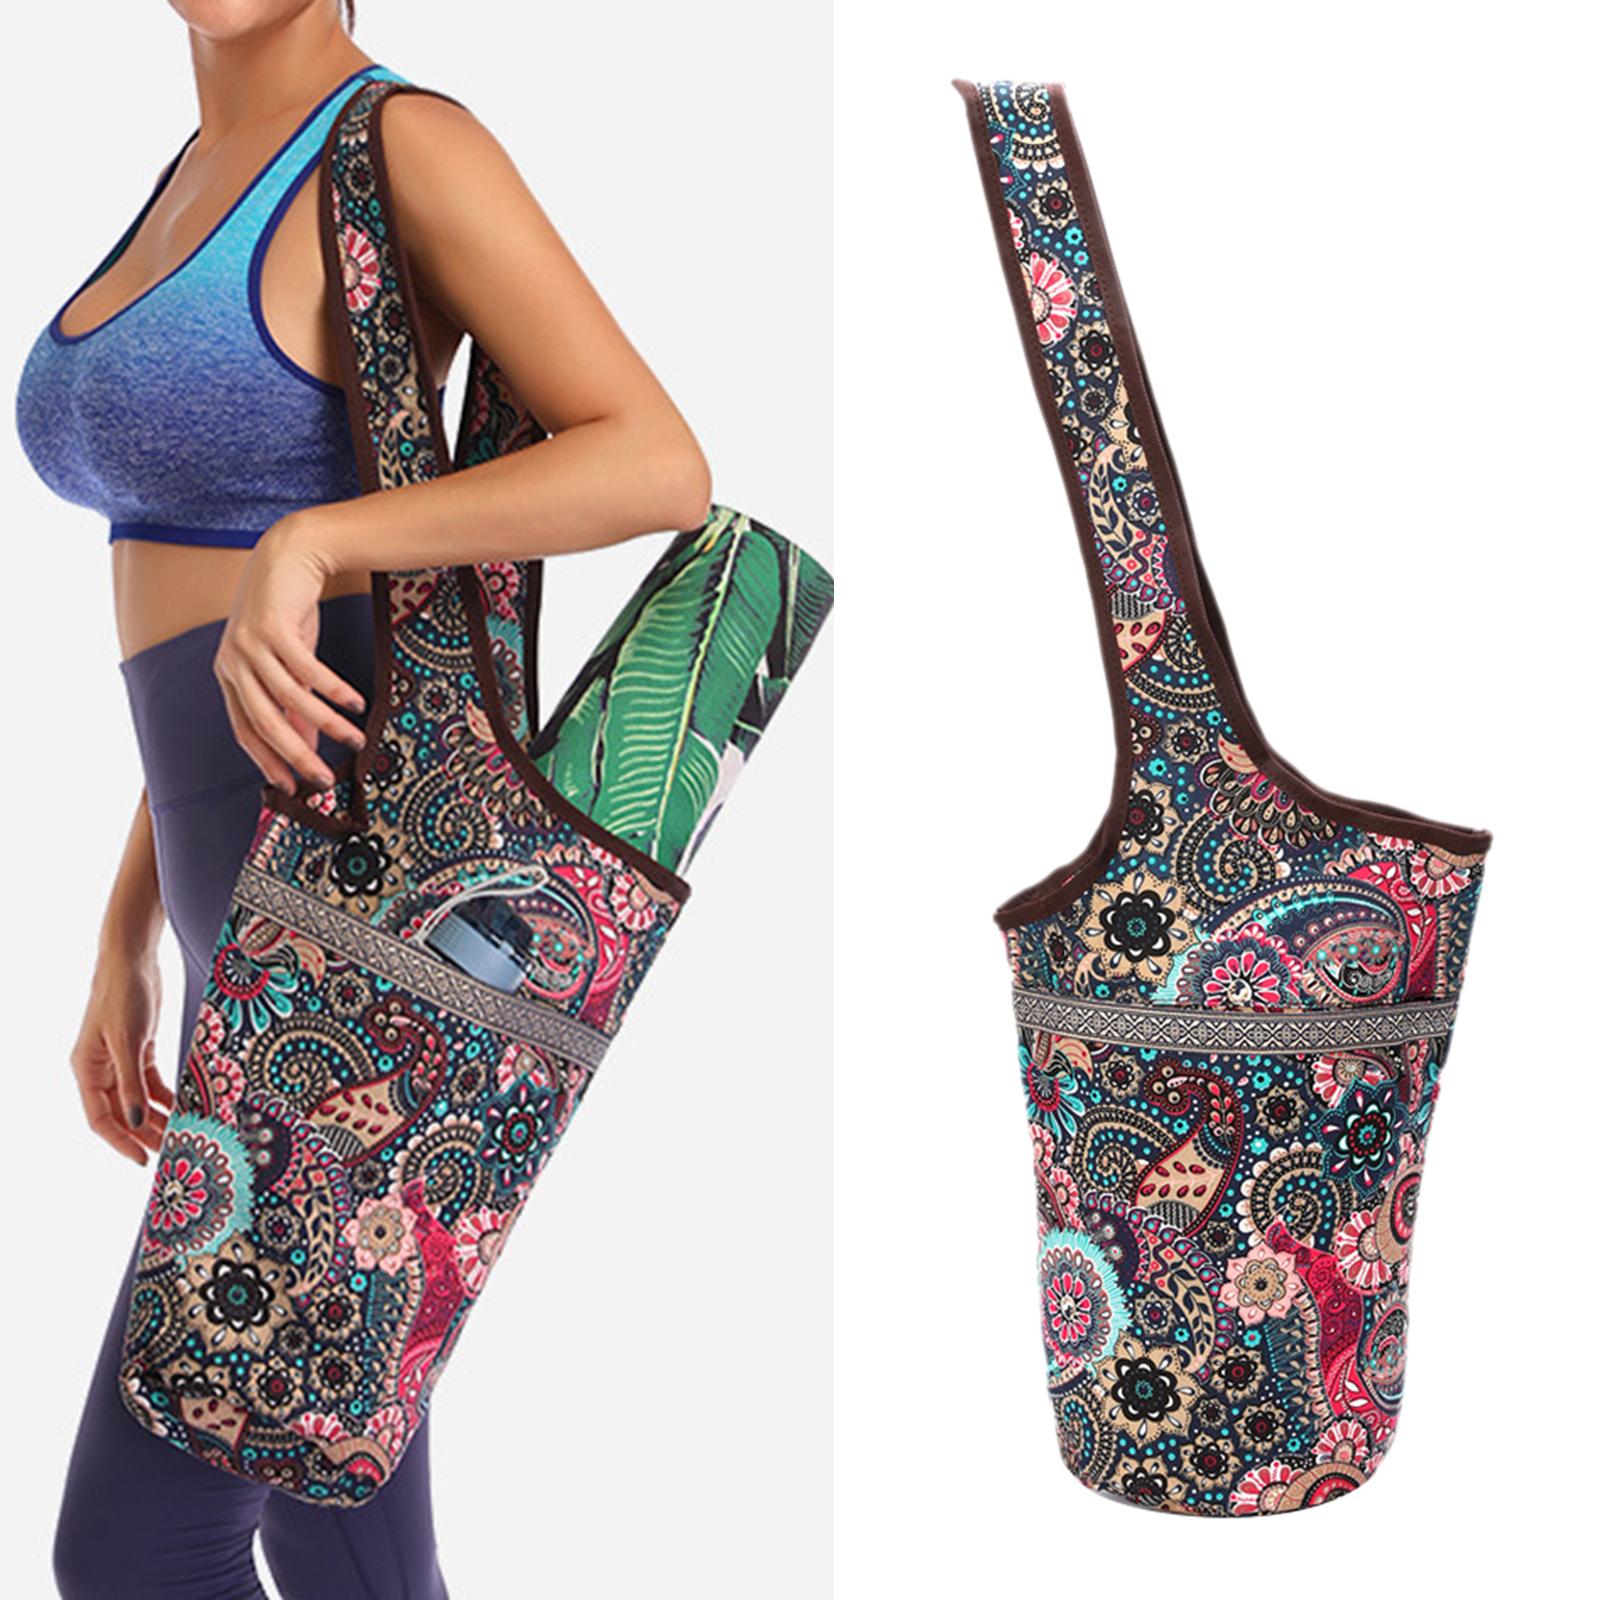 Yoga Mat Bag Large Tote Style a Perfect Carrier for All Your Yoga Needs C